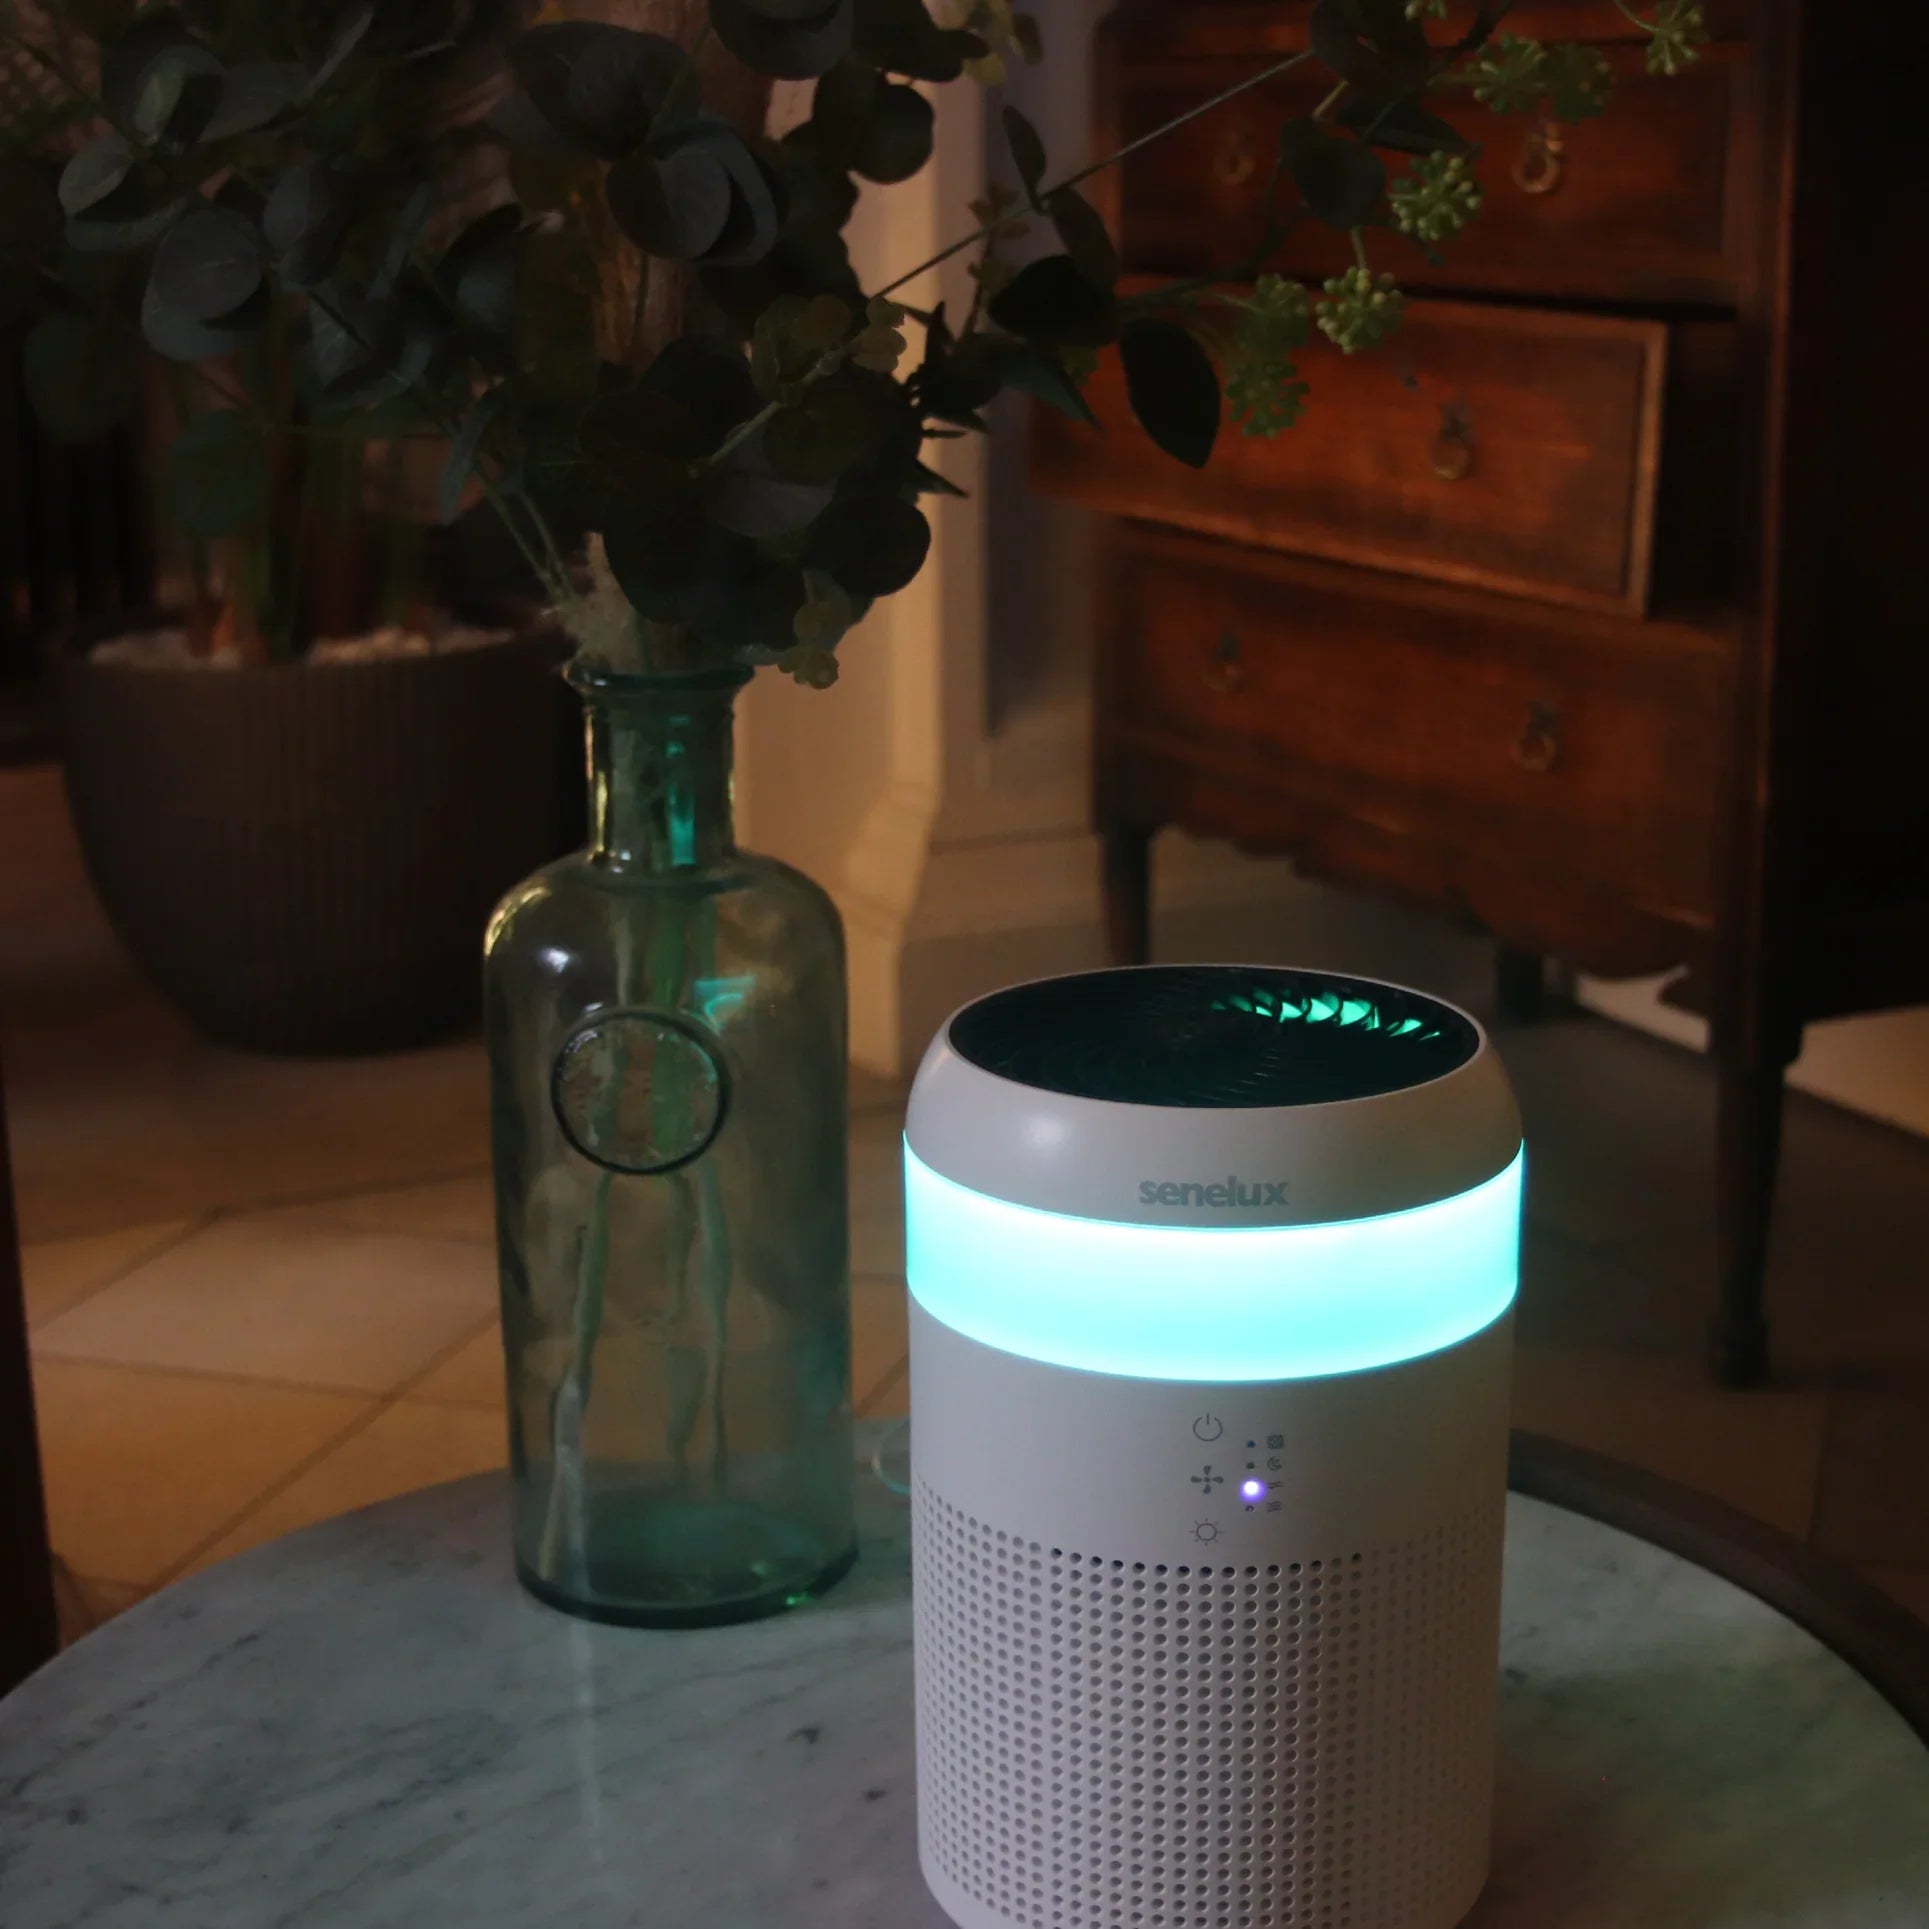 A picture of a Senelux Demi Air Purifier on a marble table with a blue light shining from it's led light strip.